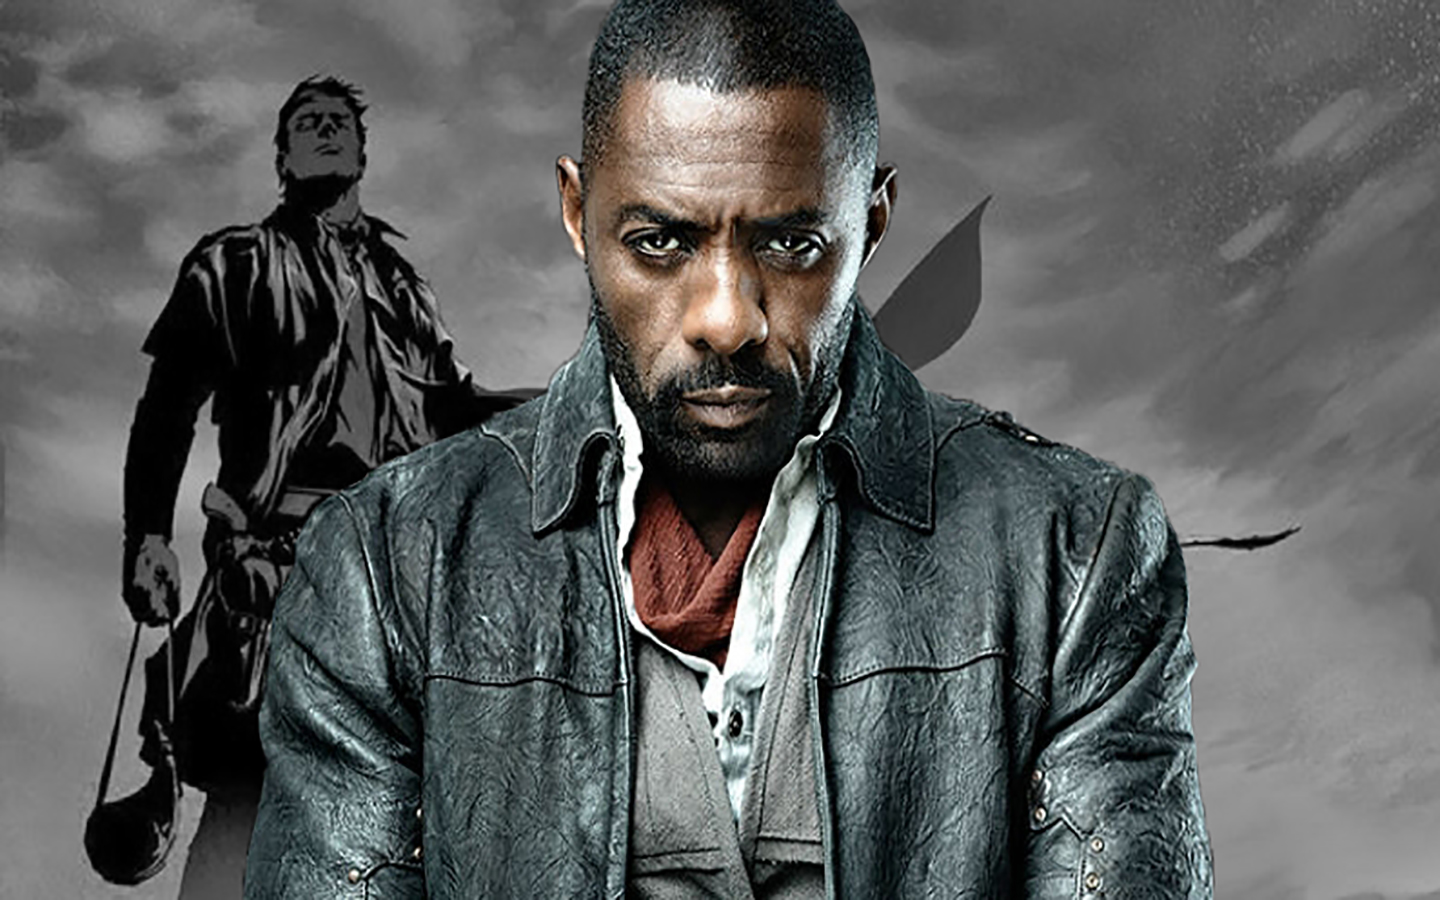 Release Date and First Poster Revealed for The Dark Tower